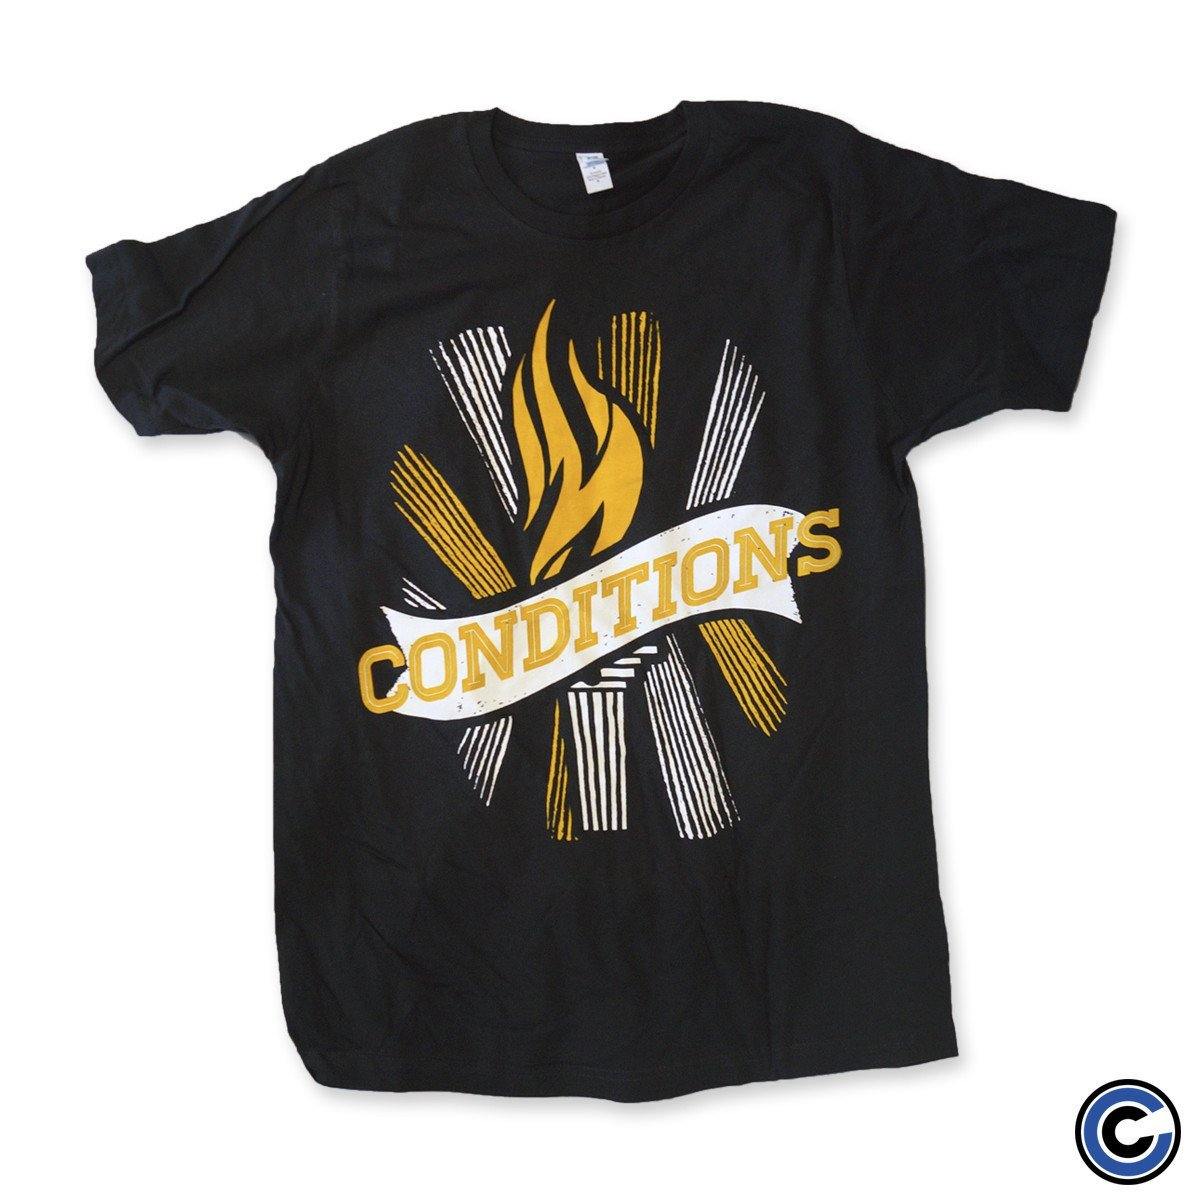 Buy – Conditions "Flame" Shirt – Band & Music Merch – Cold Cuts Merch